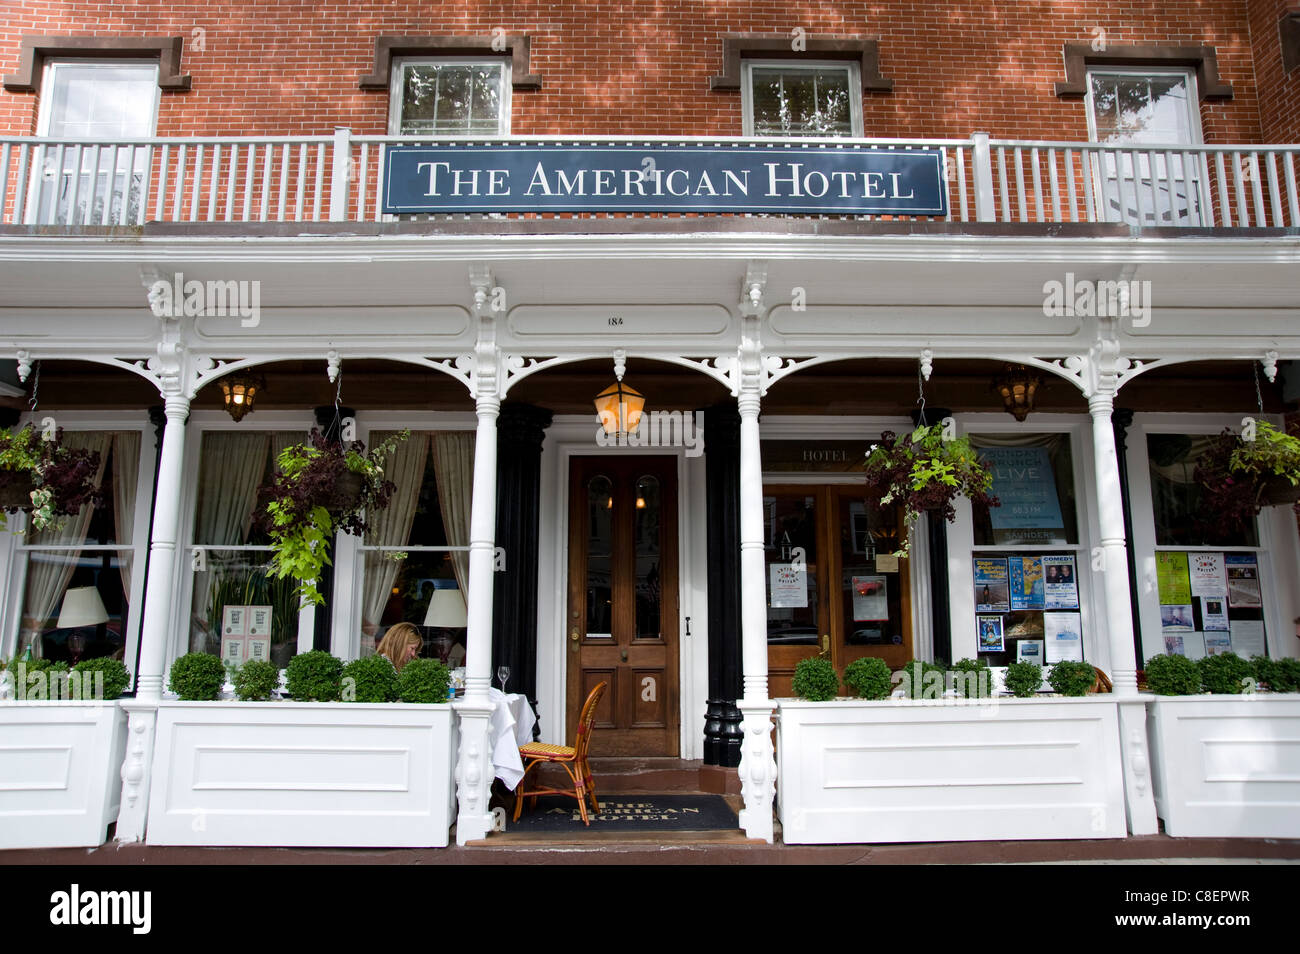 The American Hotel in Sag Harbor, Long Island, New York State, United States of America Stock Photo